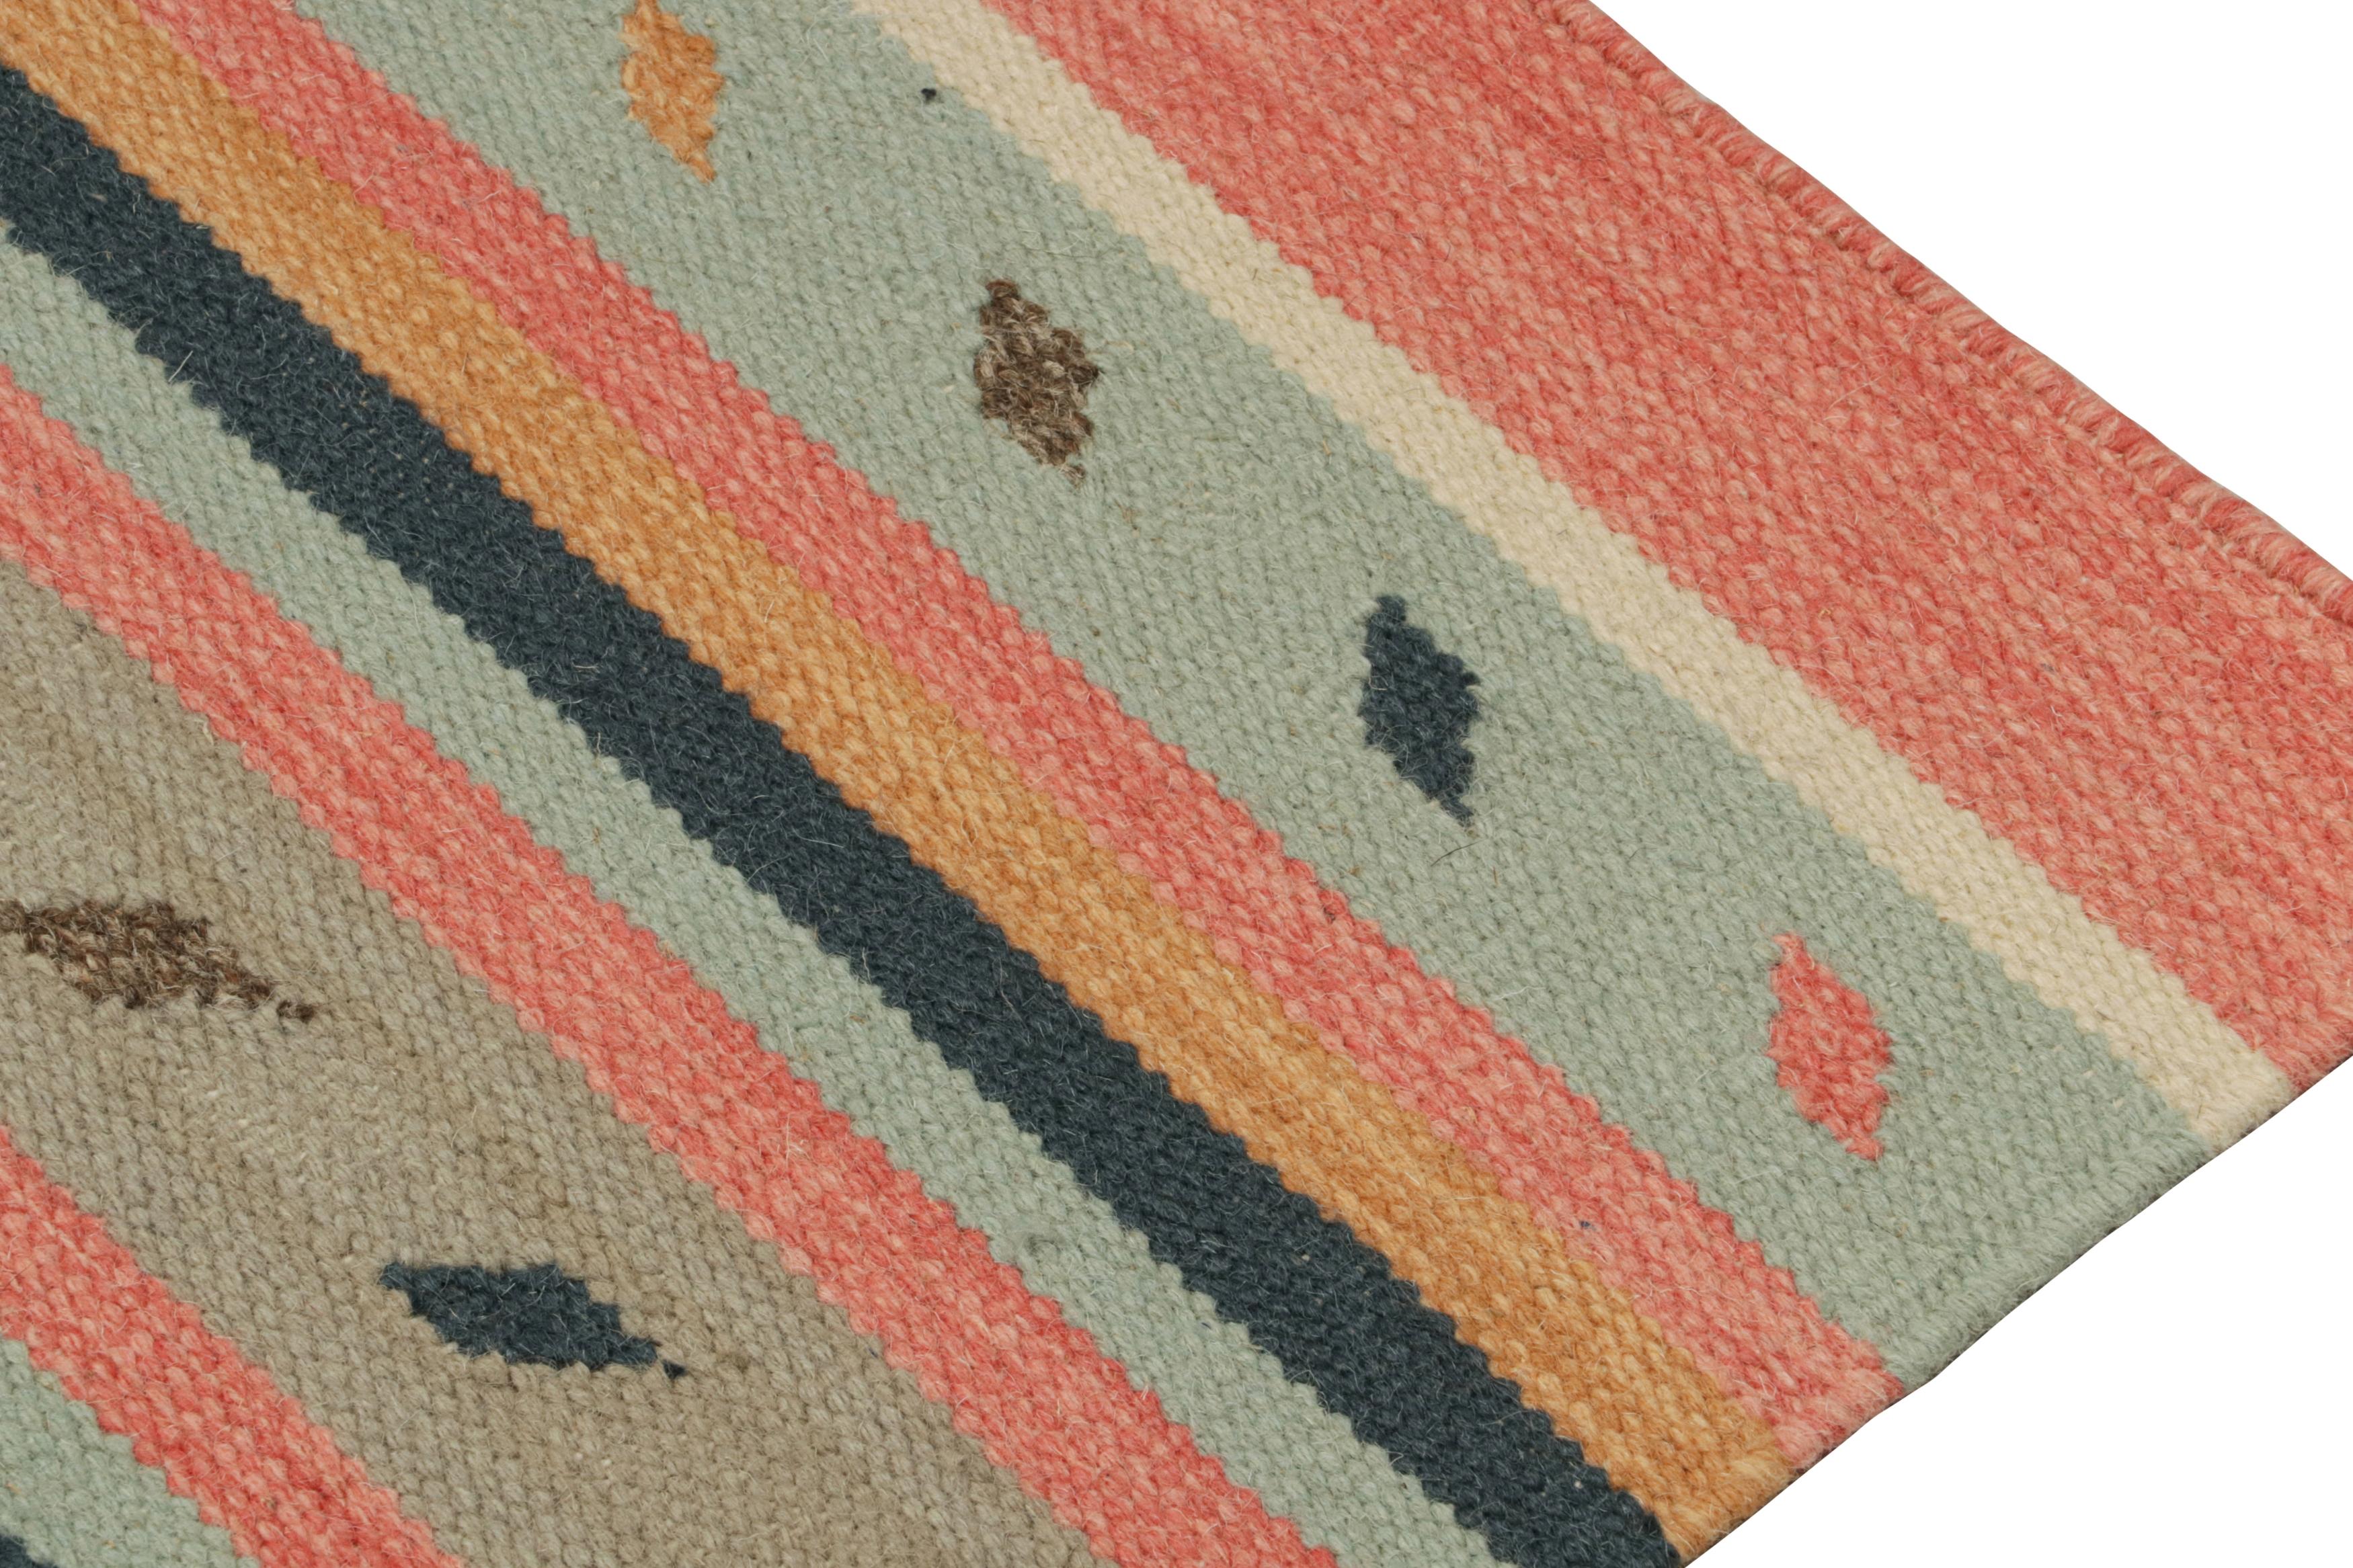 Hand-Woven Rug & Kilim’s Tribal style Kilim rug in Multicolor Patterns For Sale